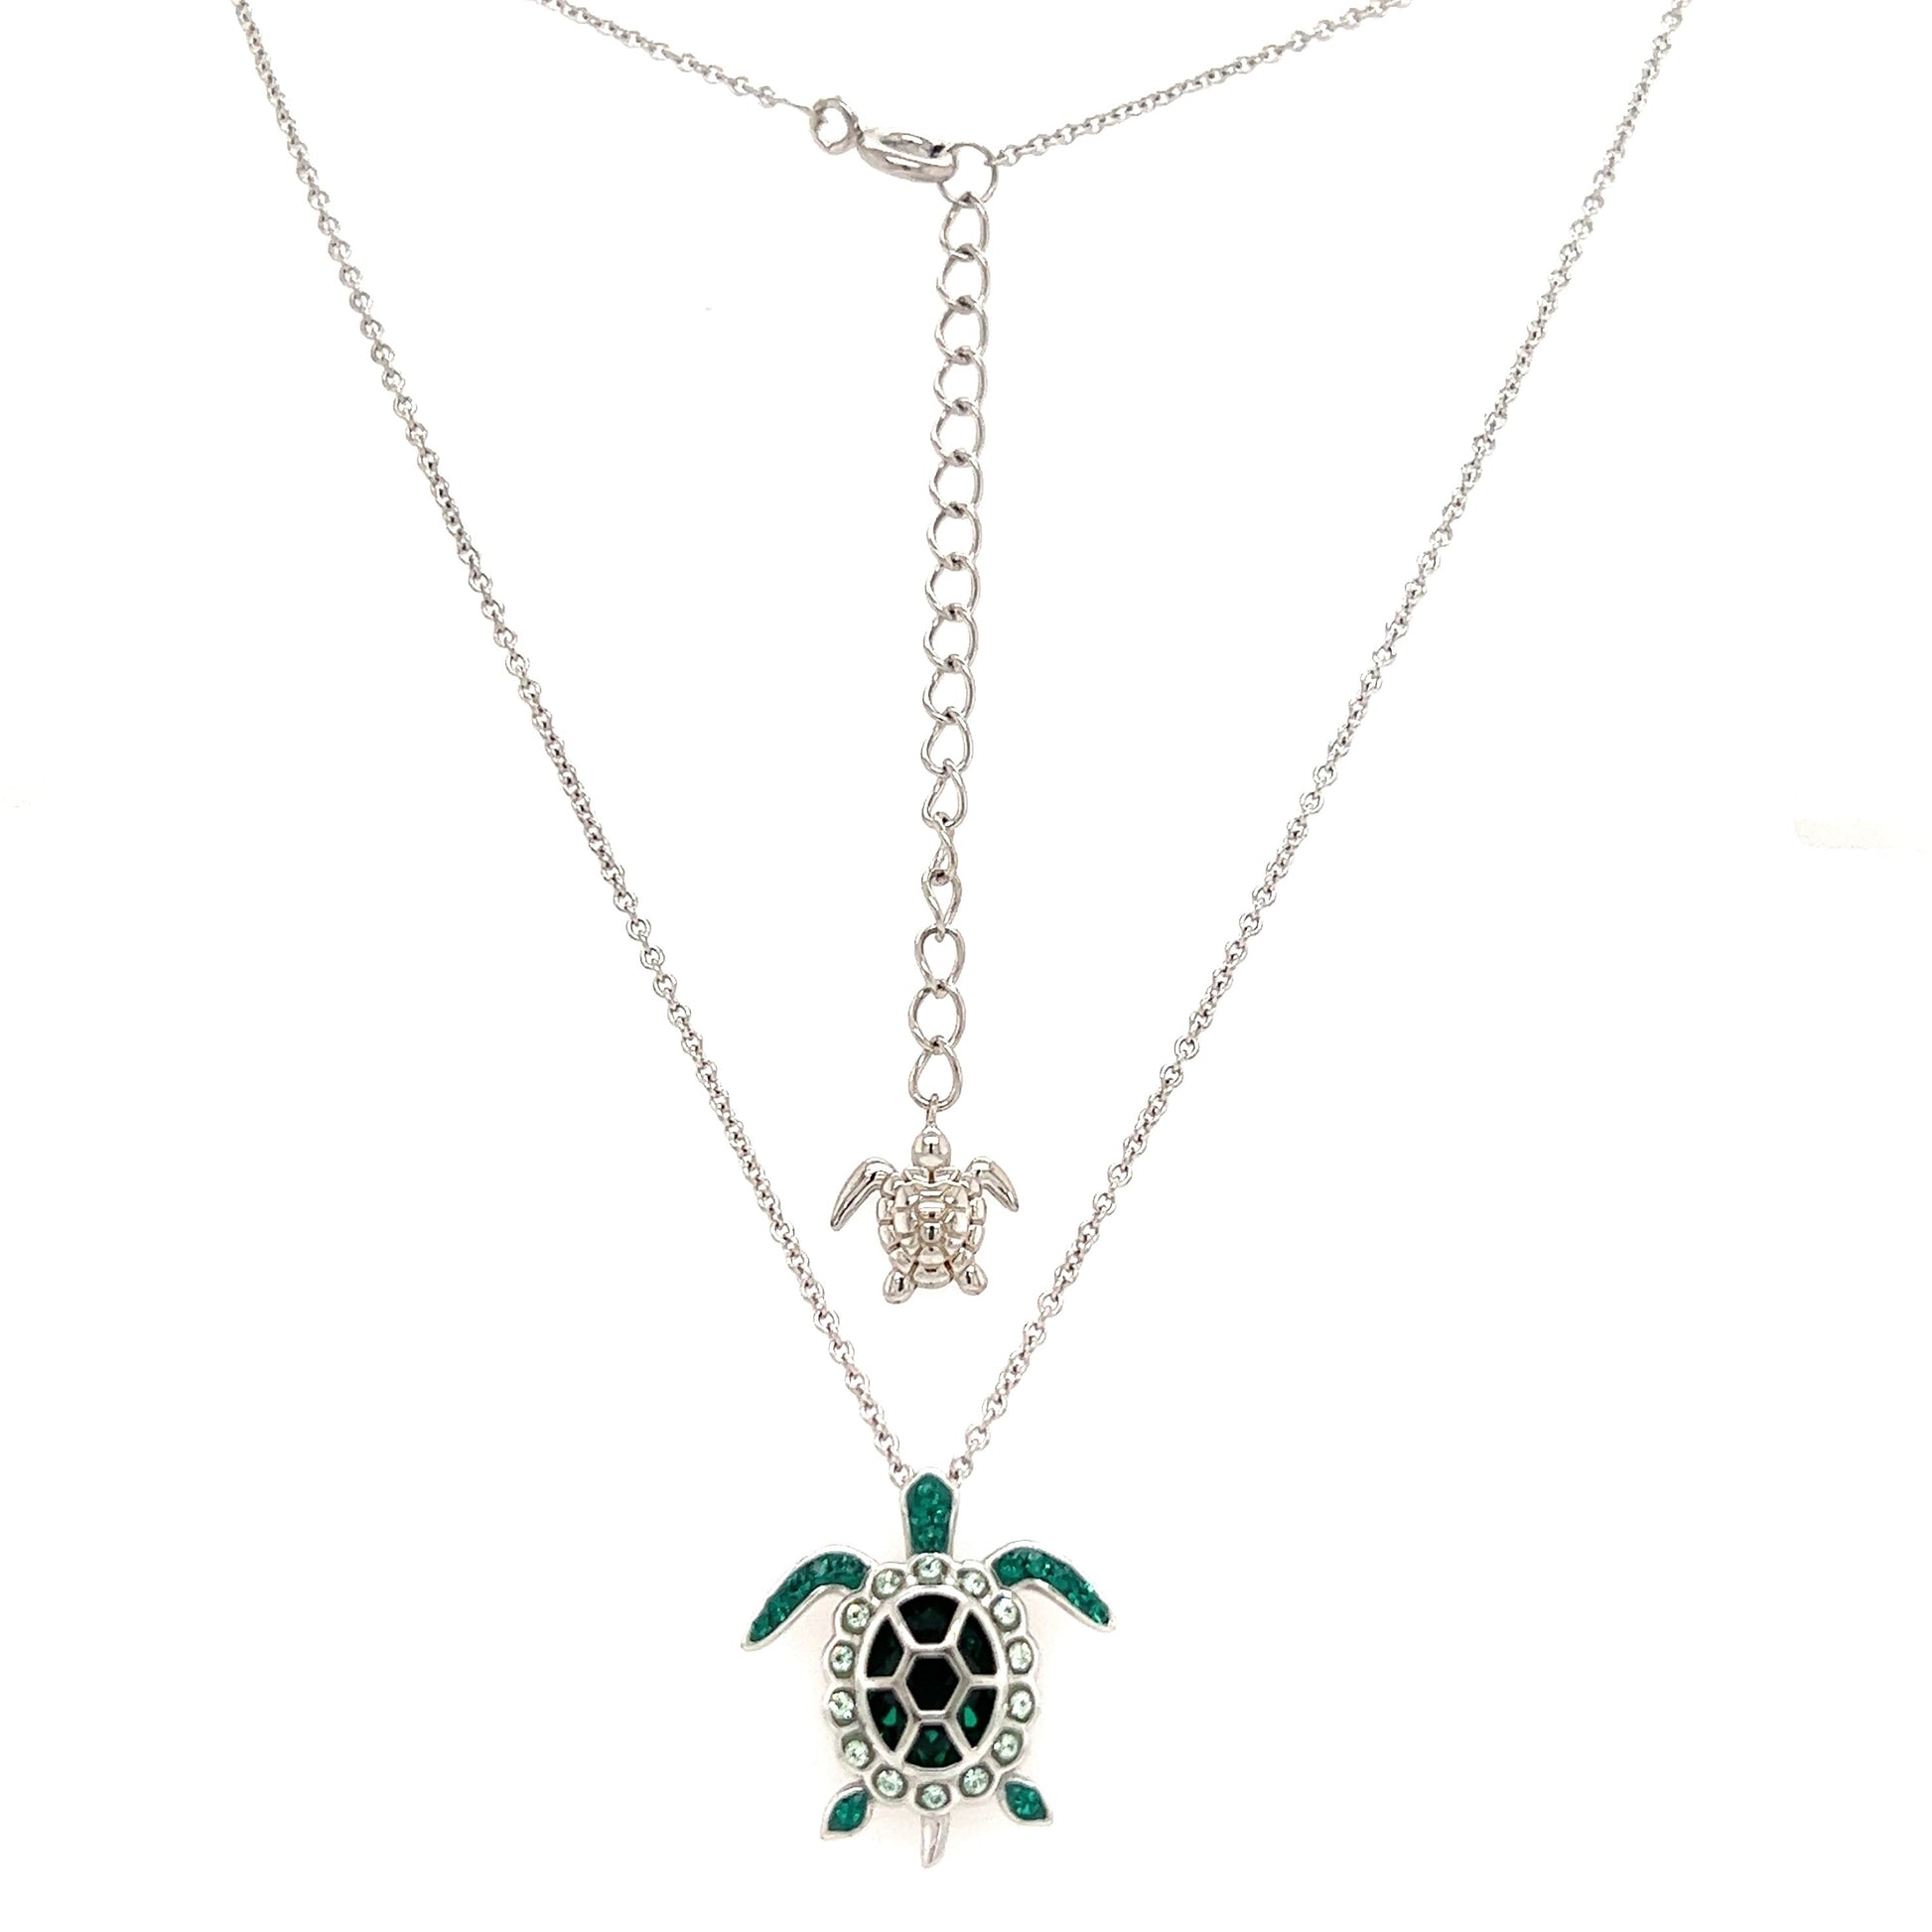 Sea Turtle Necklace with Deep Green Crystals in Sterling Silver. Full Necklace Front View